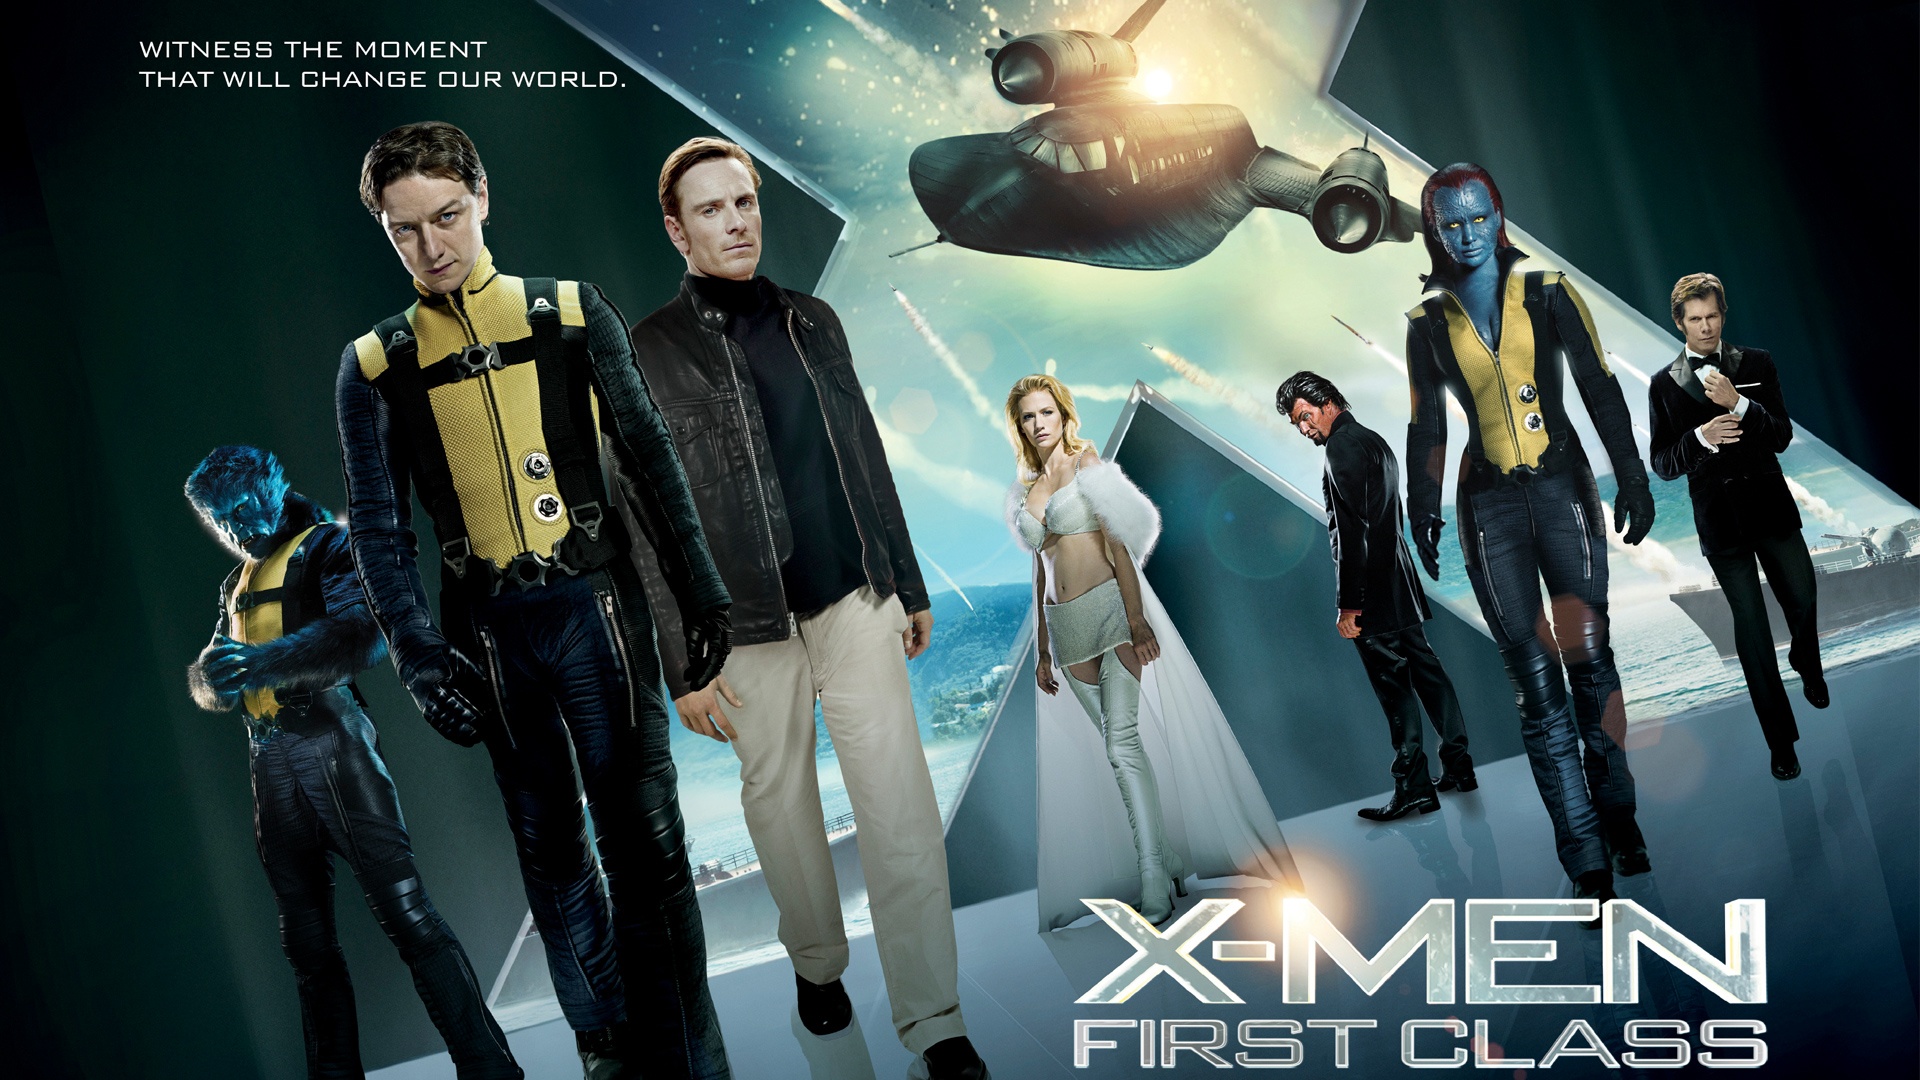 Group of iconic X-Men characters from the movie X-Men: First Class - Mystique, Beast, Emma Frost, Charles Xavier, Magneto, and Sebastian Shaw.